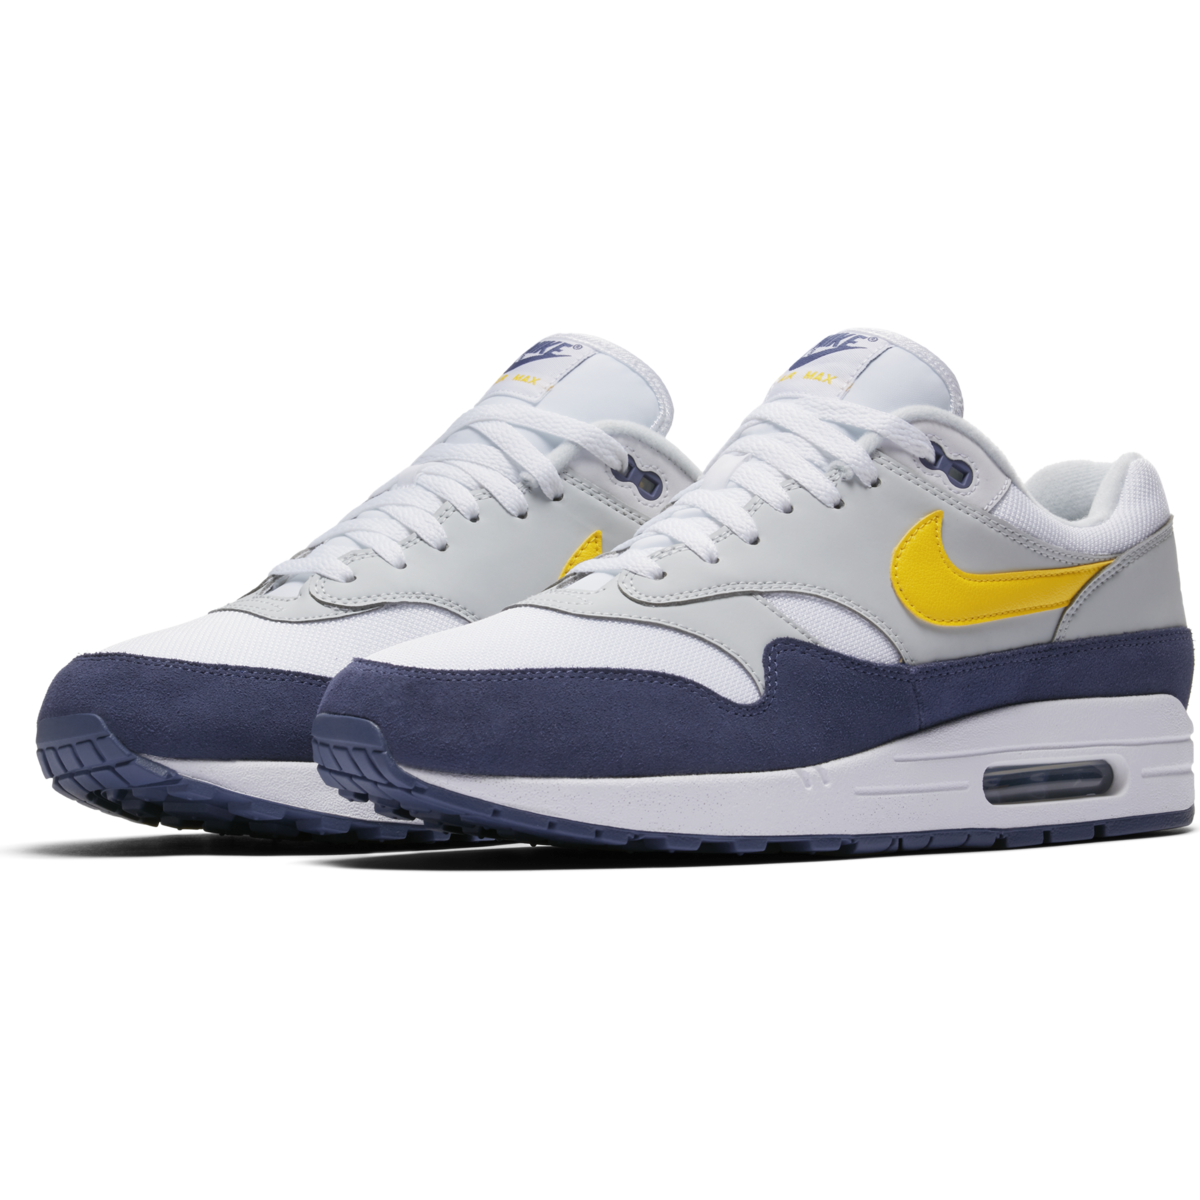 Best Nike Air Max 1 for Summer 2018 